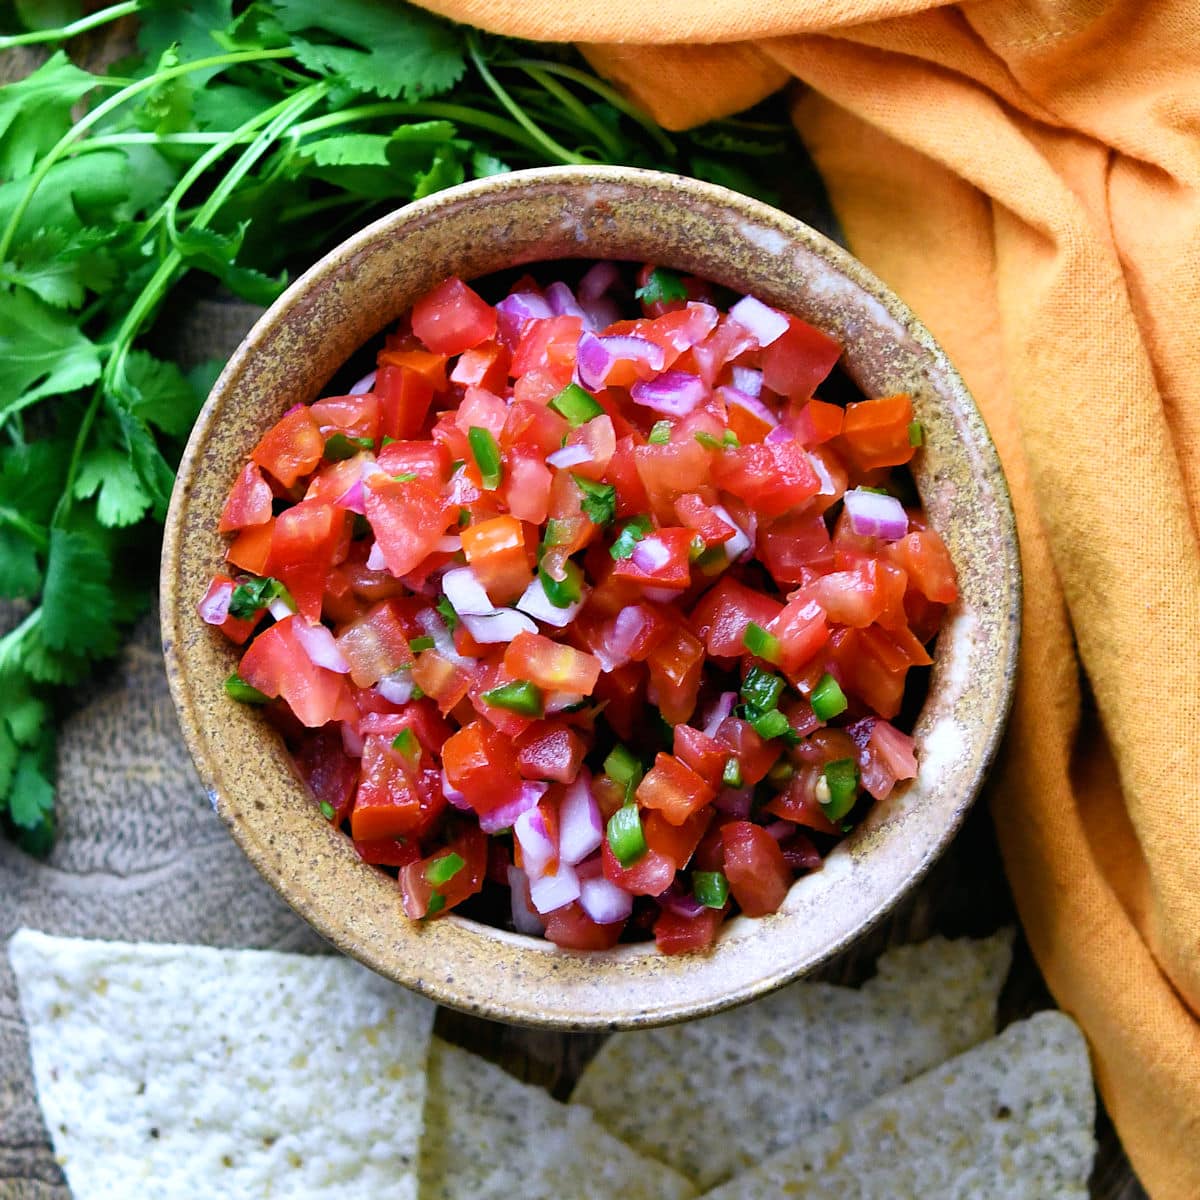 fresh pico de gallo salsa in a brown bowl with corn tortilla chips on the side